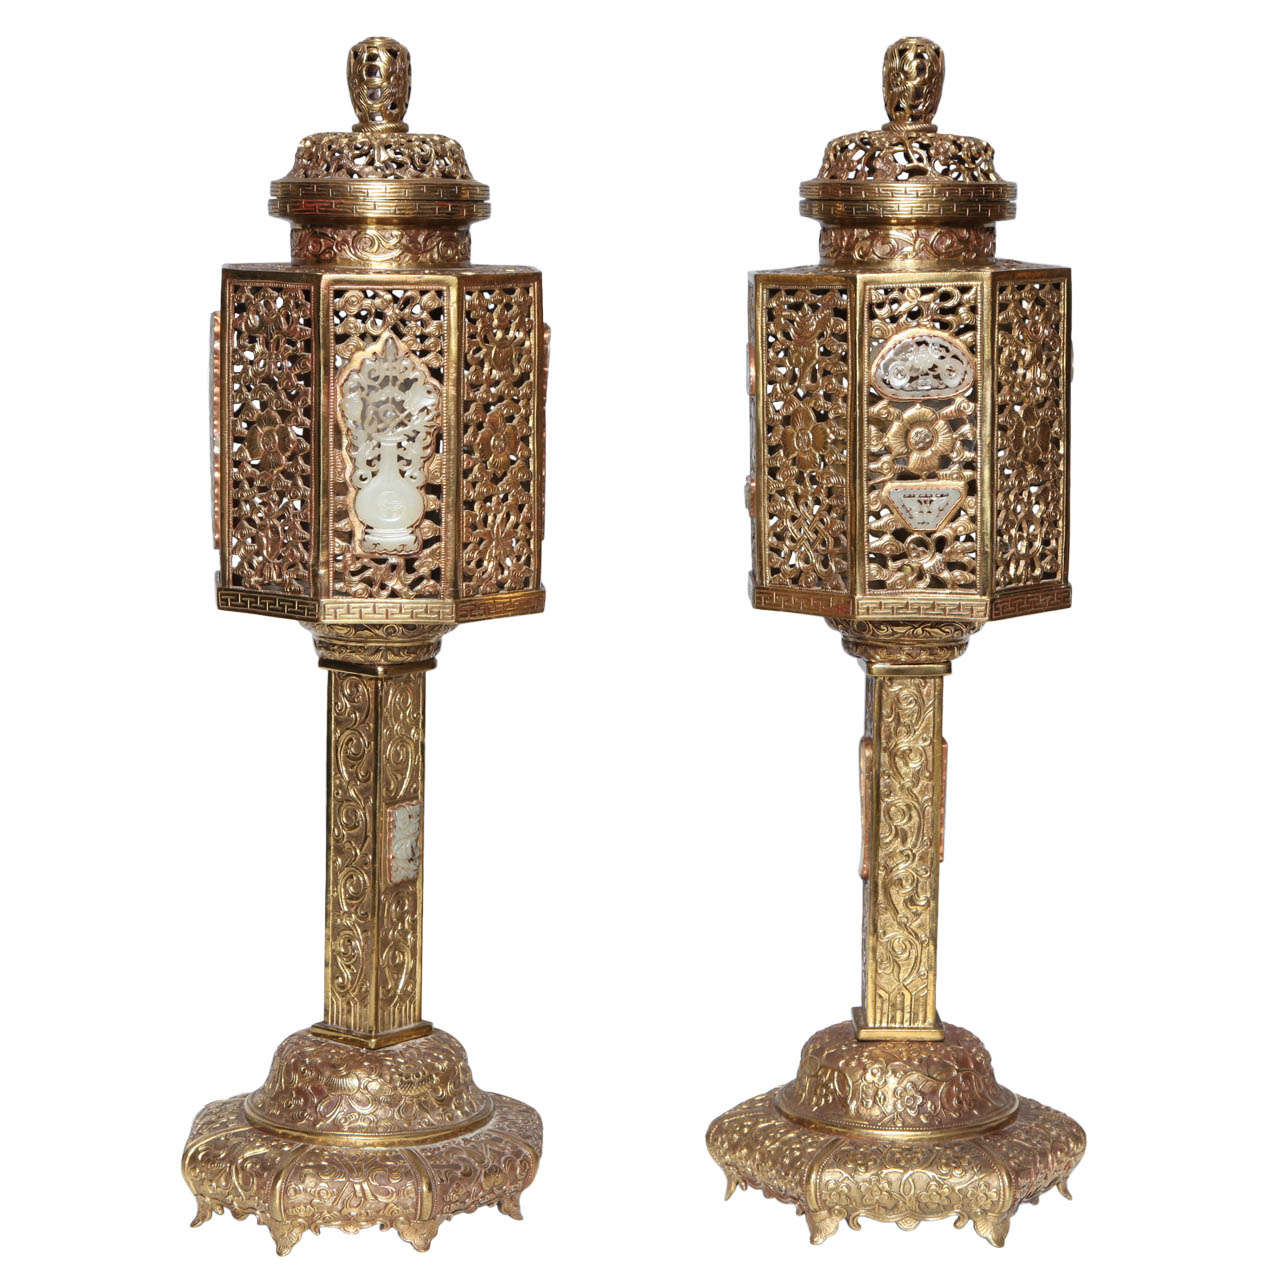 Pair of Gilt Bronze Chinese Lanterns, Traditional Style with Inlaid Jade Plaques